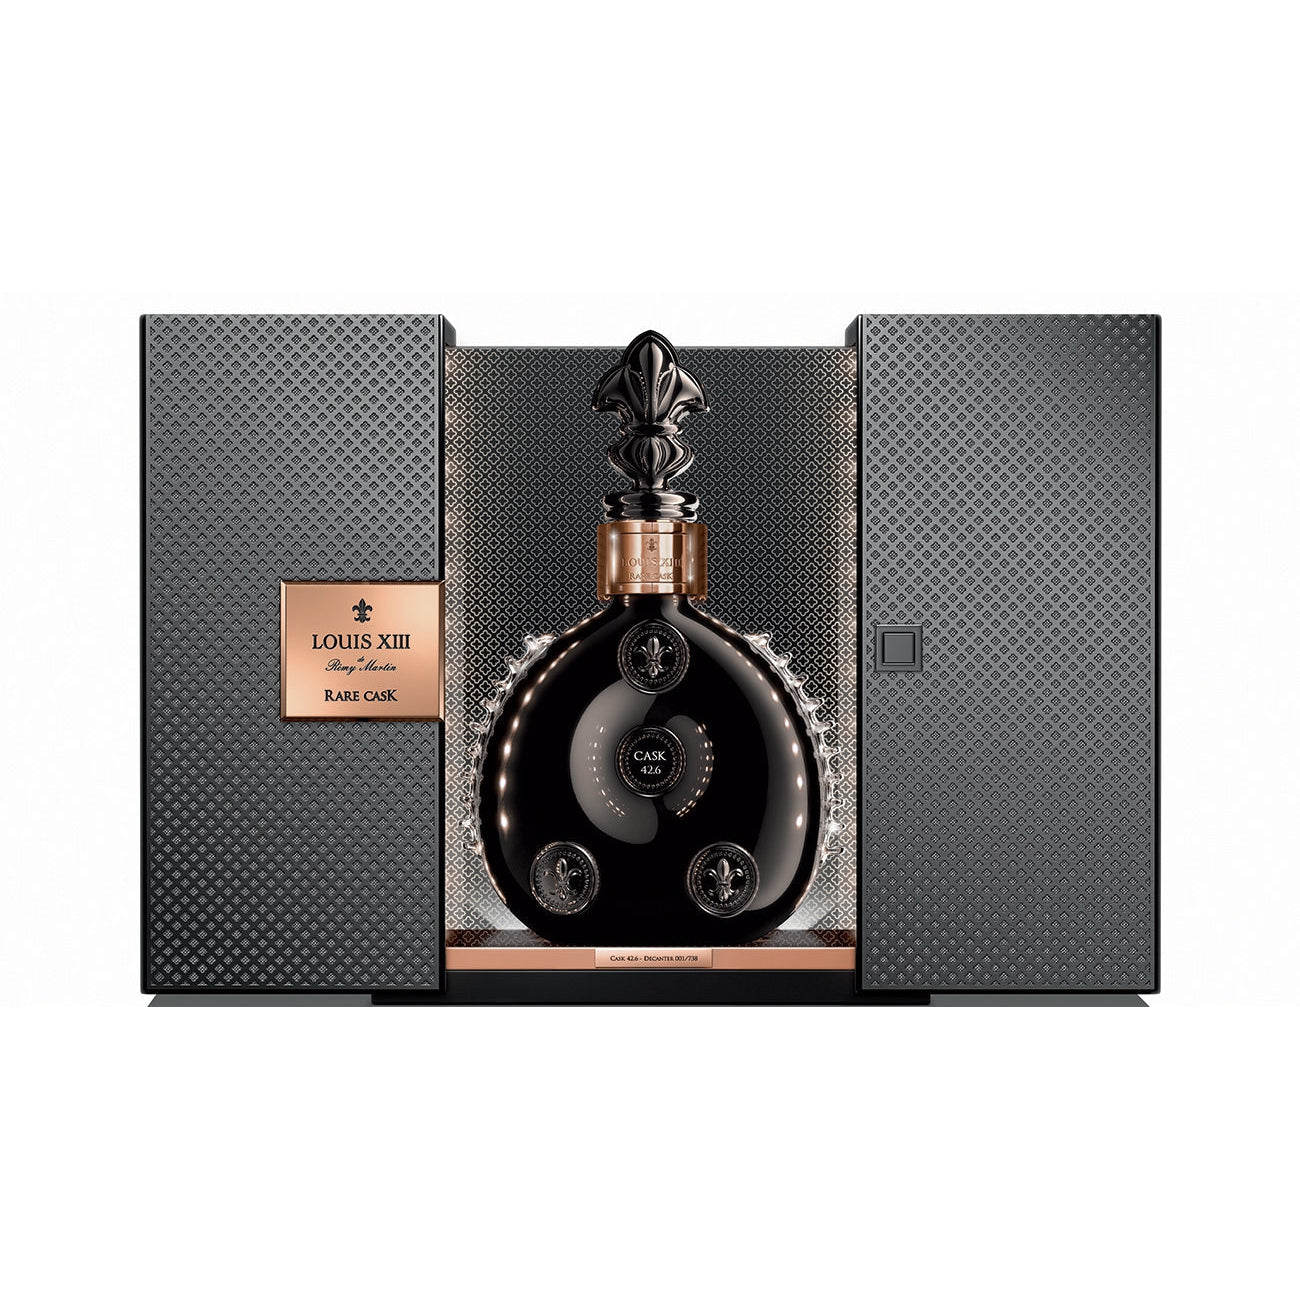 KING LOUIS XIII RARE CASK 750ml – Corks & Crates